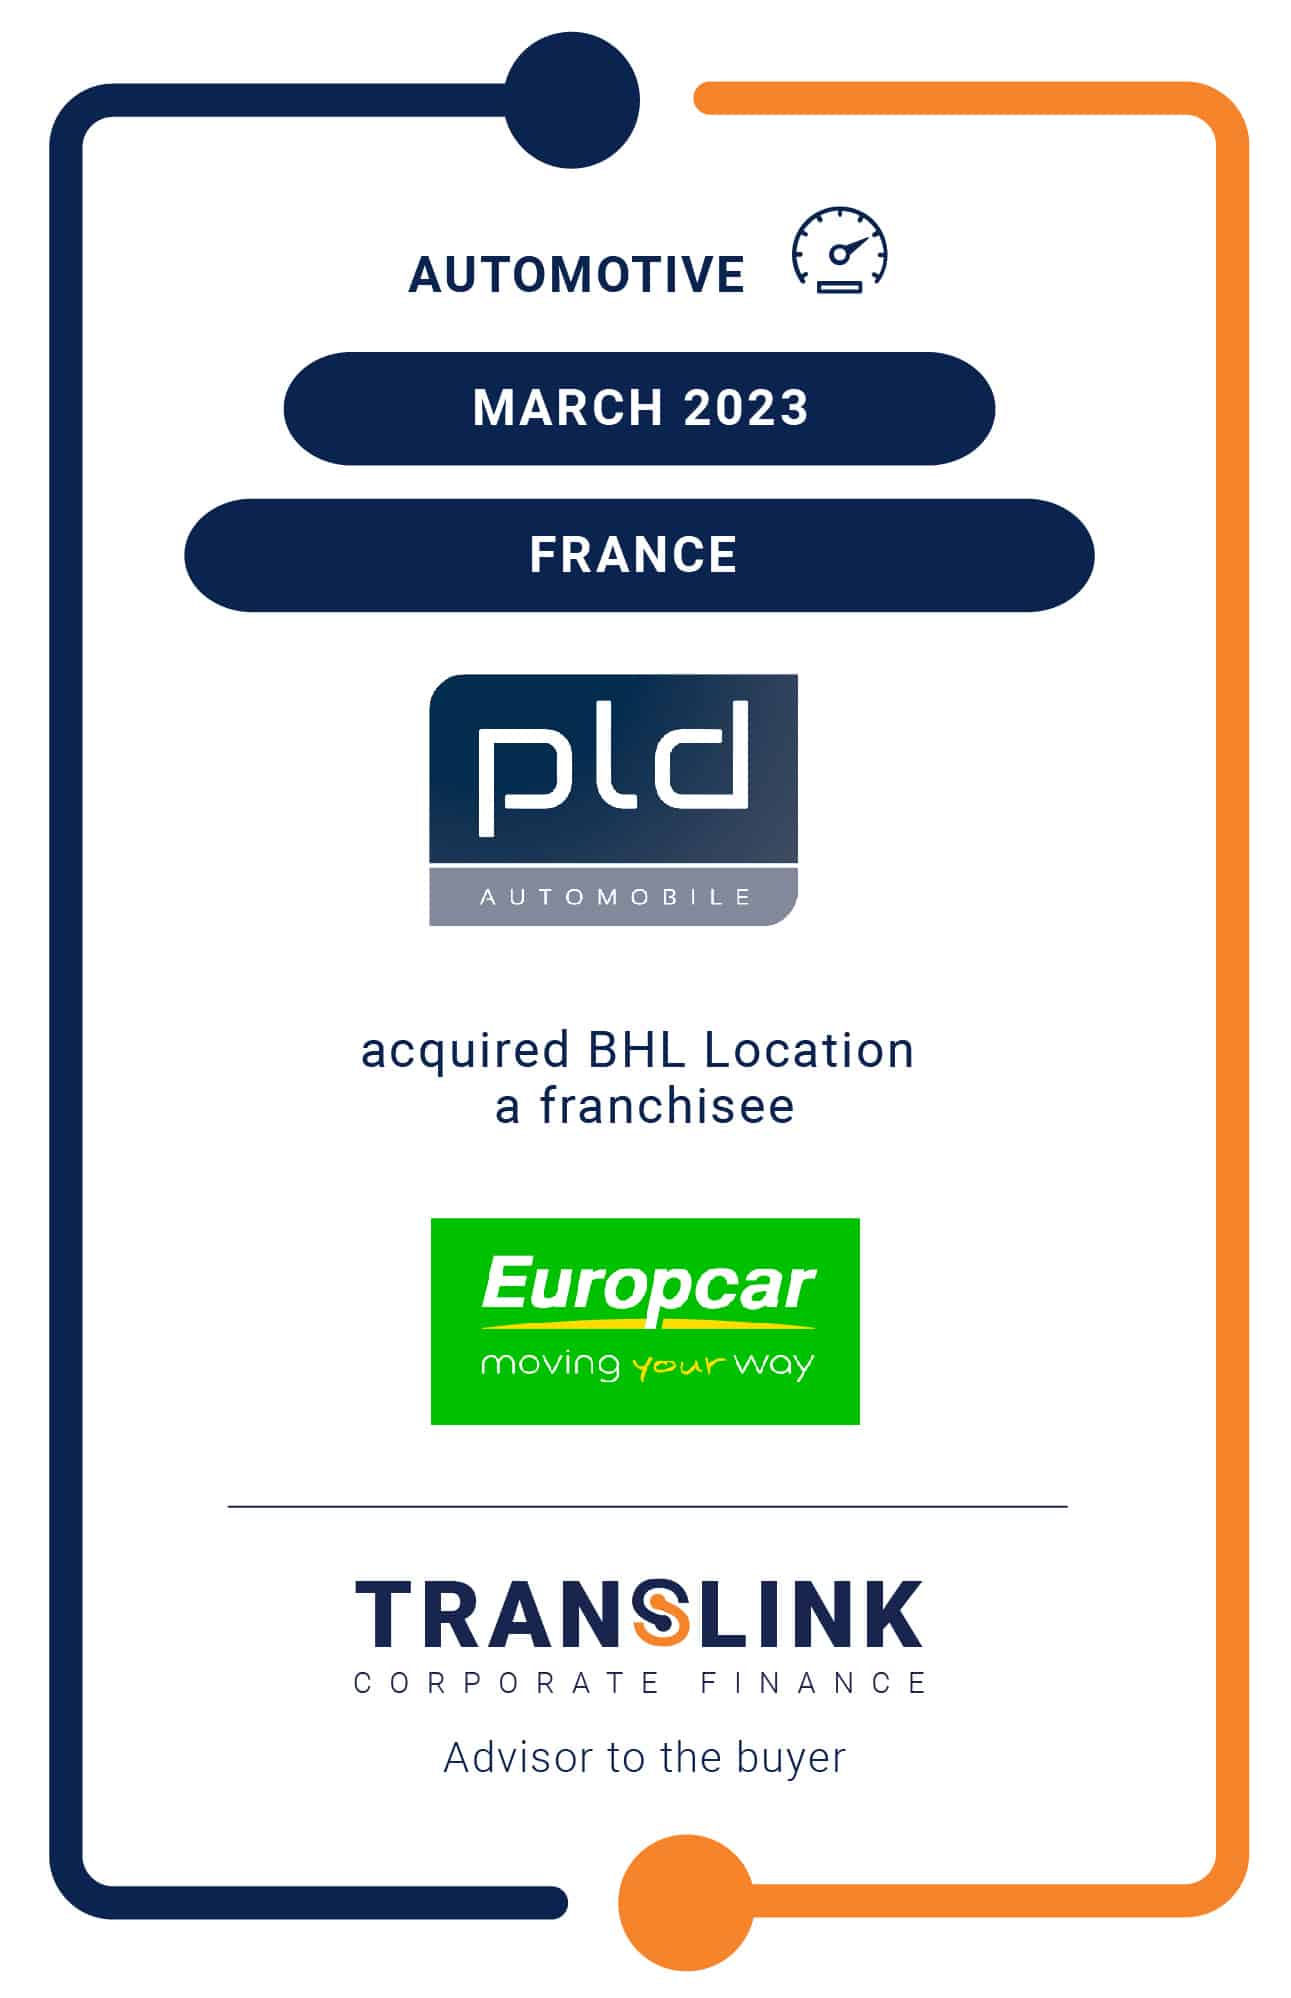 Translink advised PLD Auto on the acquisition of a Europcar franchisee with 7 agencies in the south-east of France